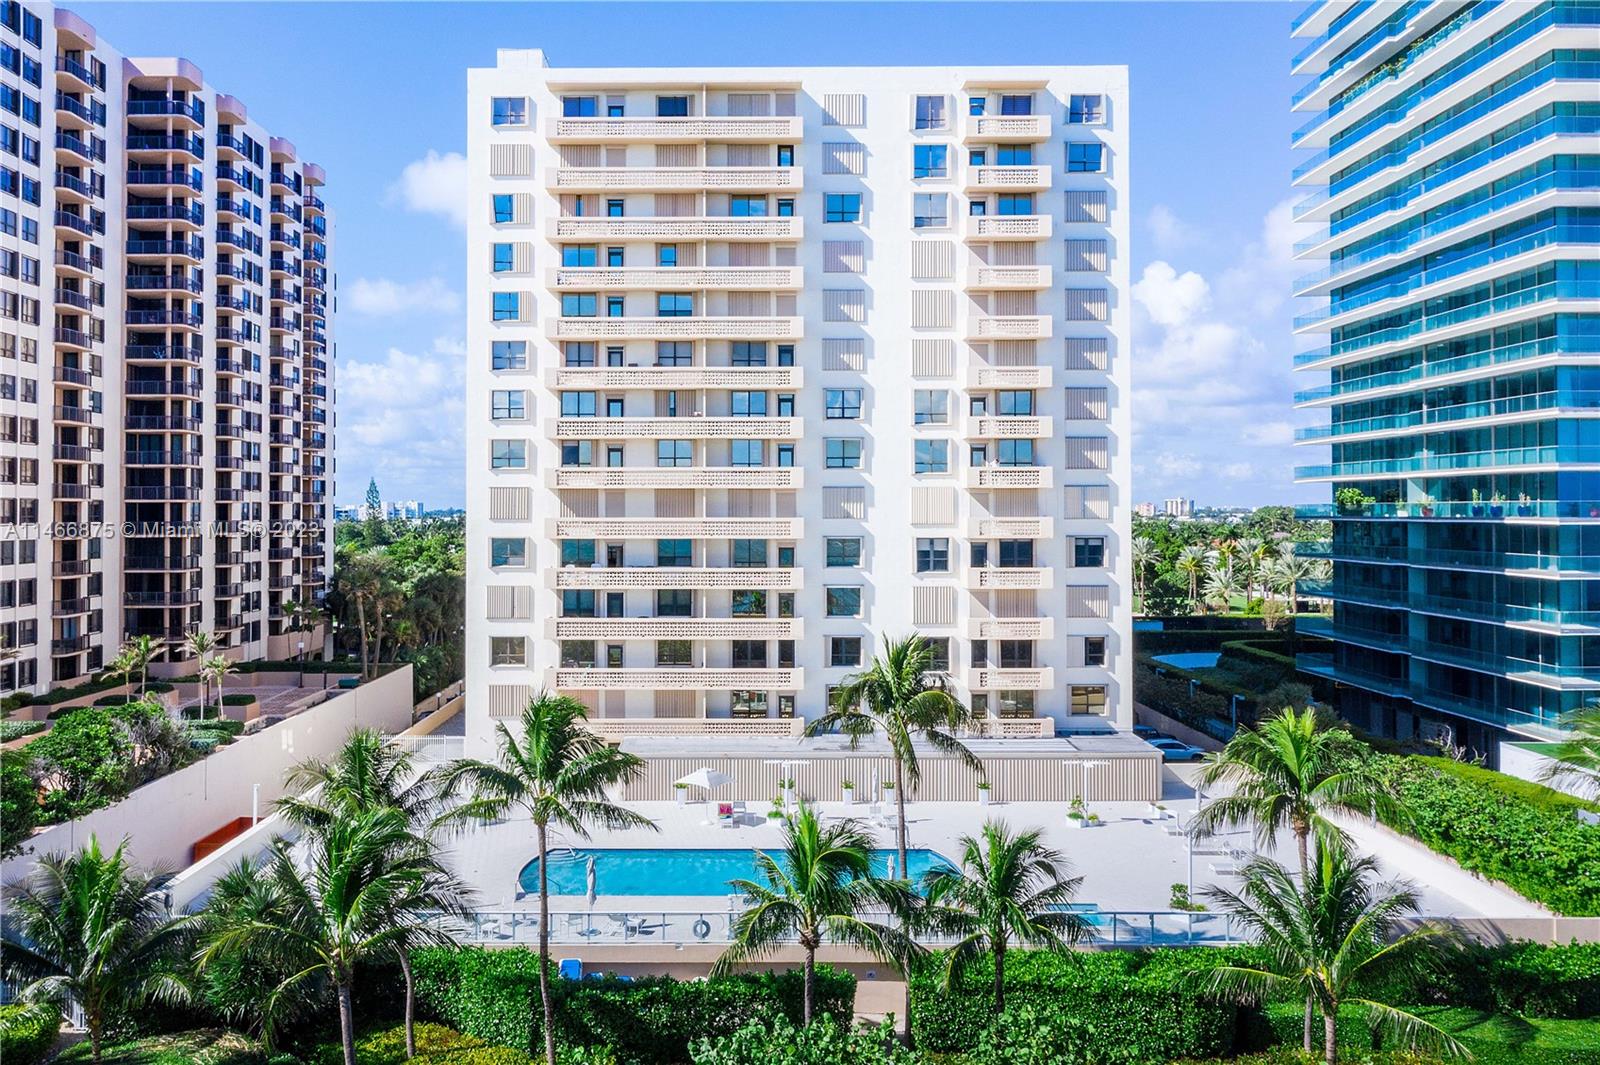 Nice one-bedroom unit, Great Location. Great Views of the Intracoastal and Bay. The unit. includes Cable TV, Internet, Valet Parking, and Hot Water. Very Nice Pool and Gym. Near Bal Harbour Shops and numerous Restaurants in Surfside. Tenant Occupied. 24 HRS Notice to Show.